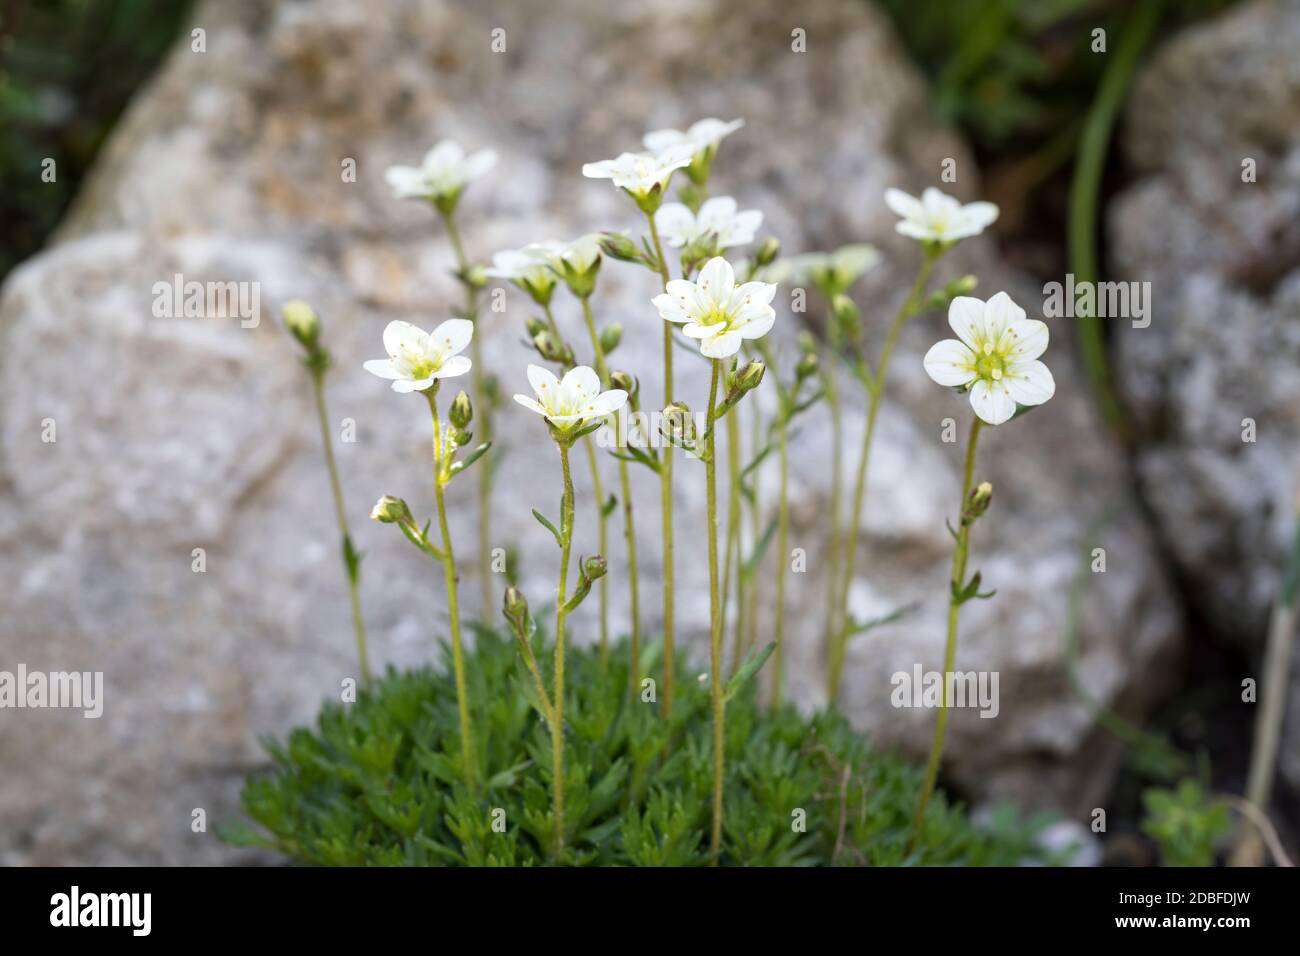 Saxifraga arendsii flowers in a rock garden Stock Photo